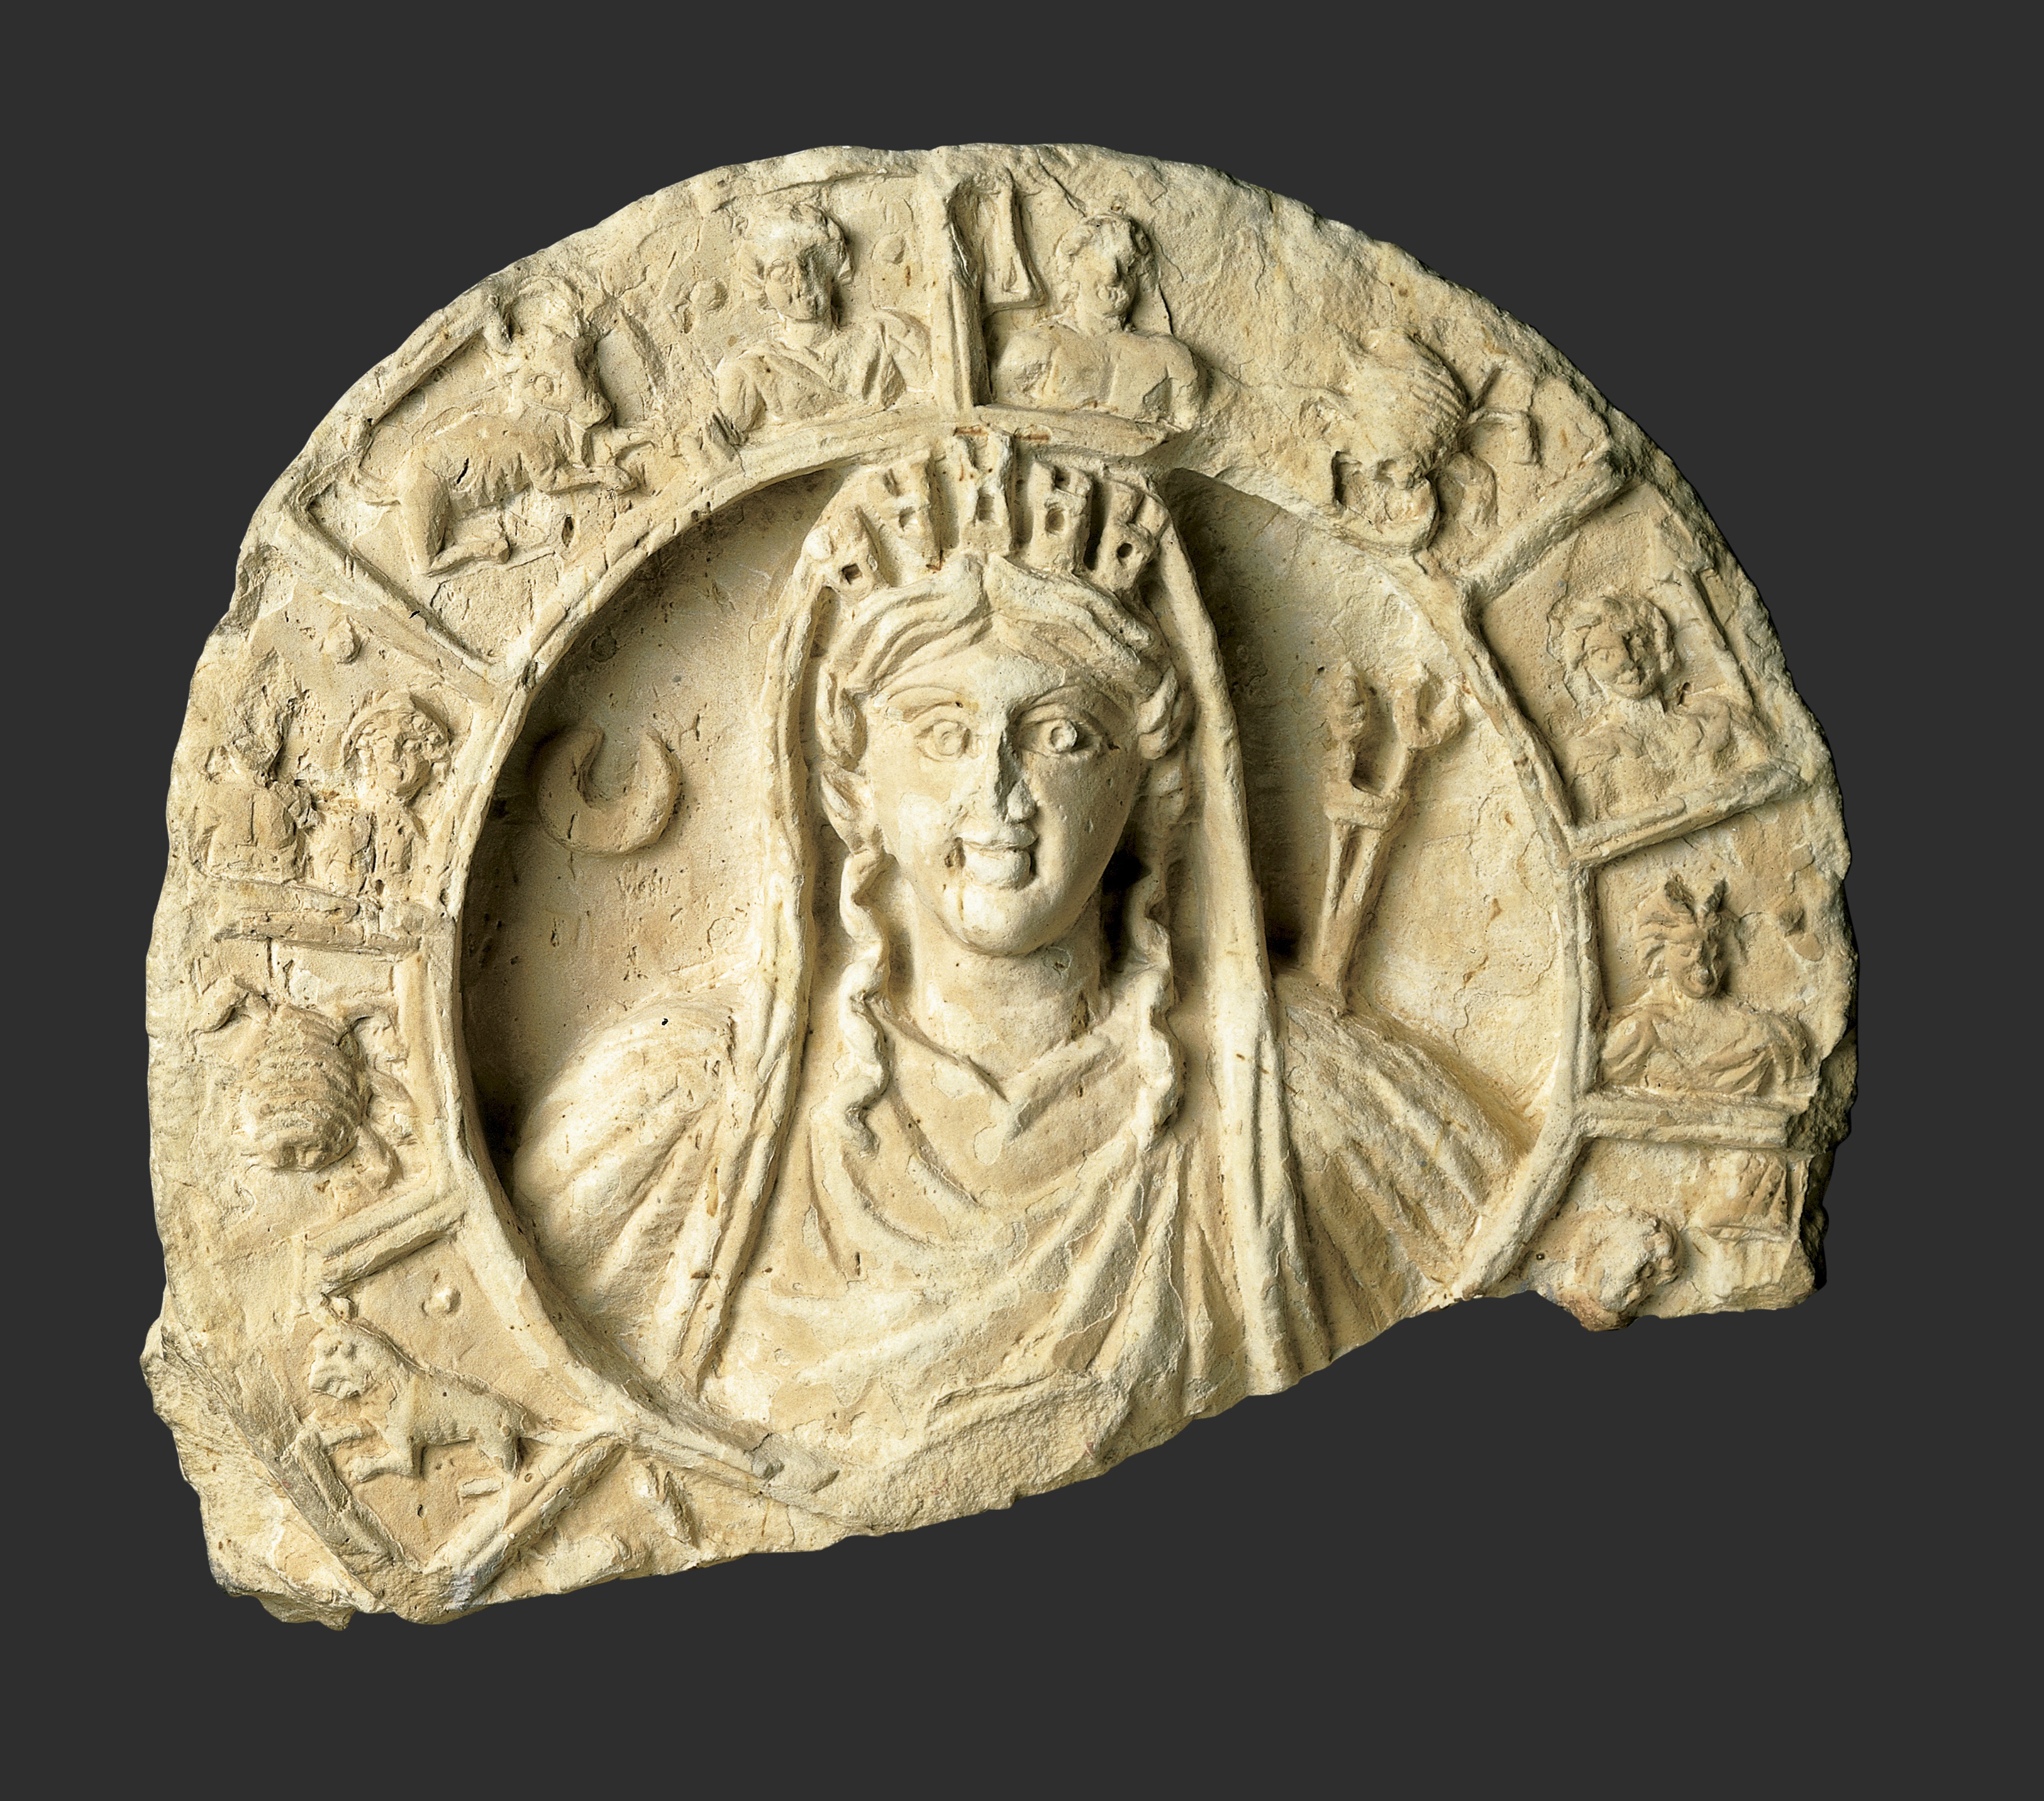 Exhibition Opens October 19th: Time and Cosmos in Greco-Roman Antiquity